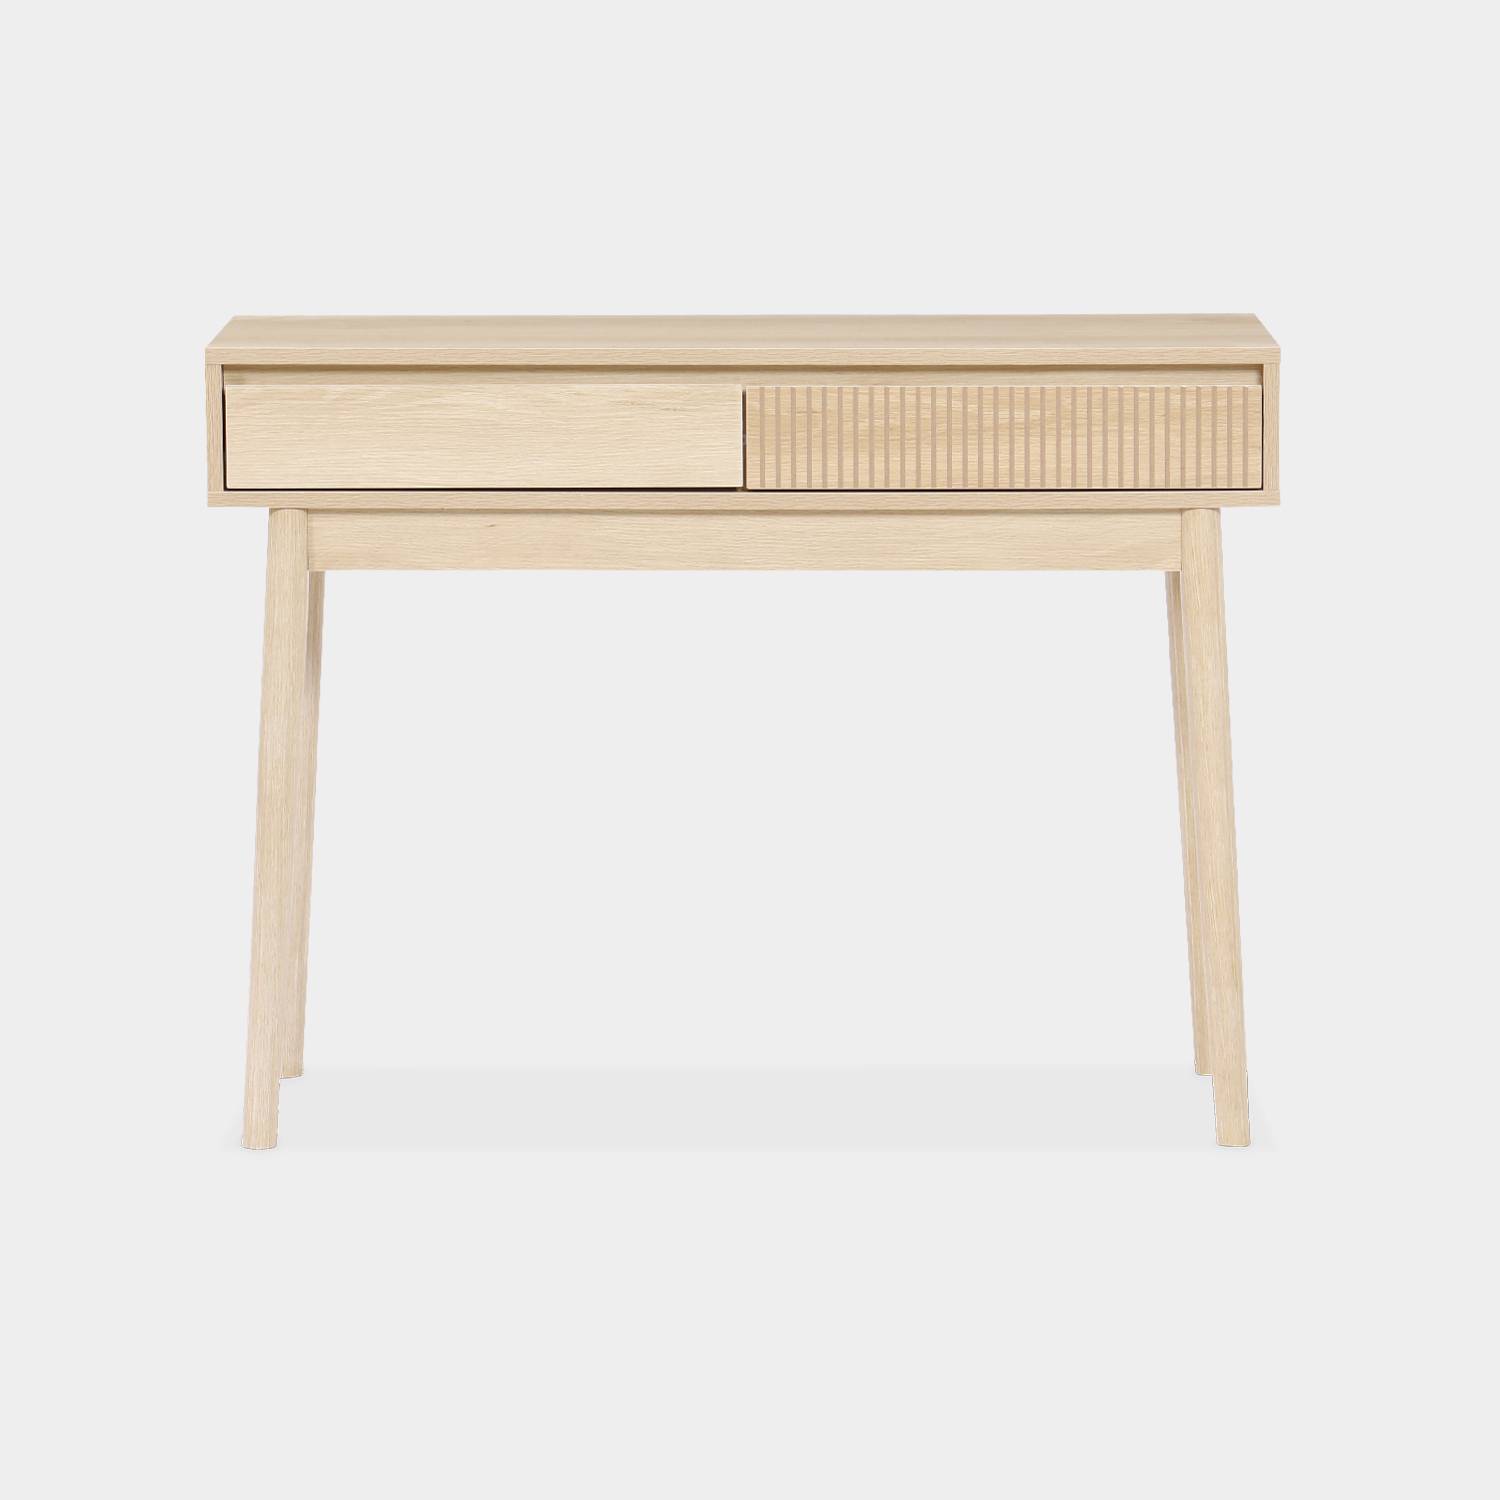 Grooved wood detail console table, 100x30x75cm, Linear, Natural wood colour,sweeek,Photo4